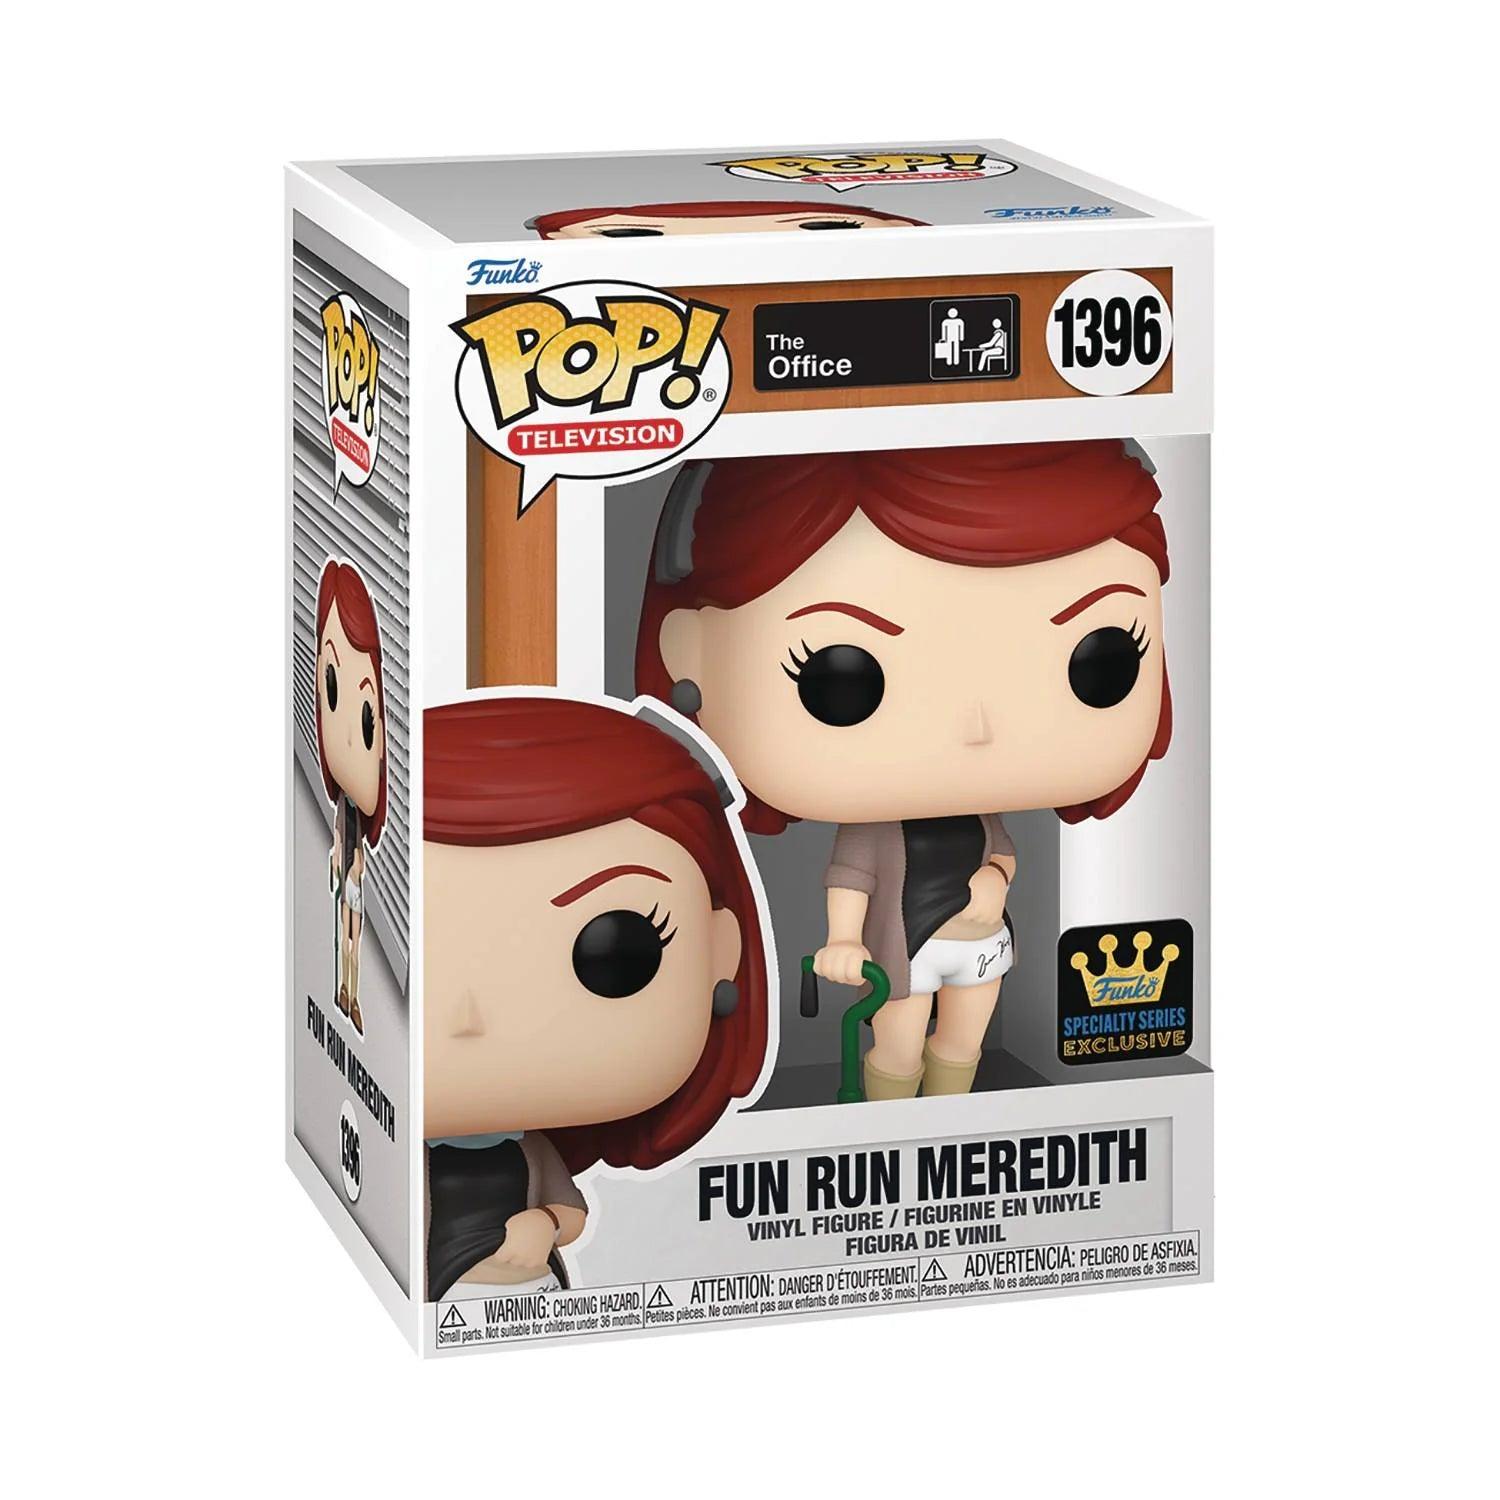 Pop! Television - The Office - Fun Run Meredith - #1396 - Funko SPECIALITY Series EXCLUSIVE - Hobby Champion Inc